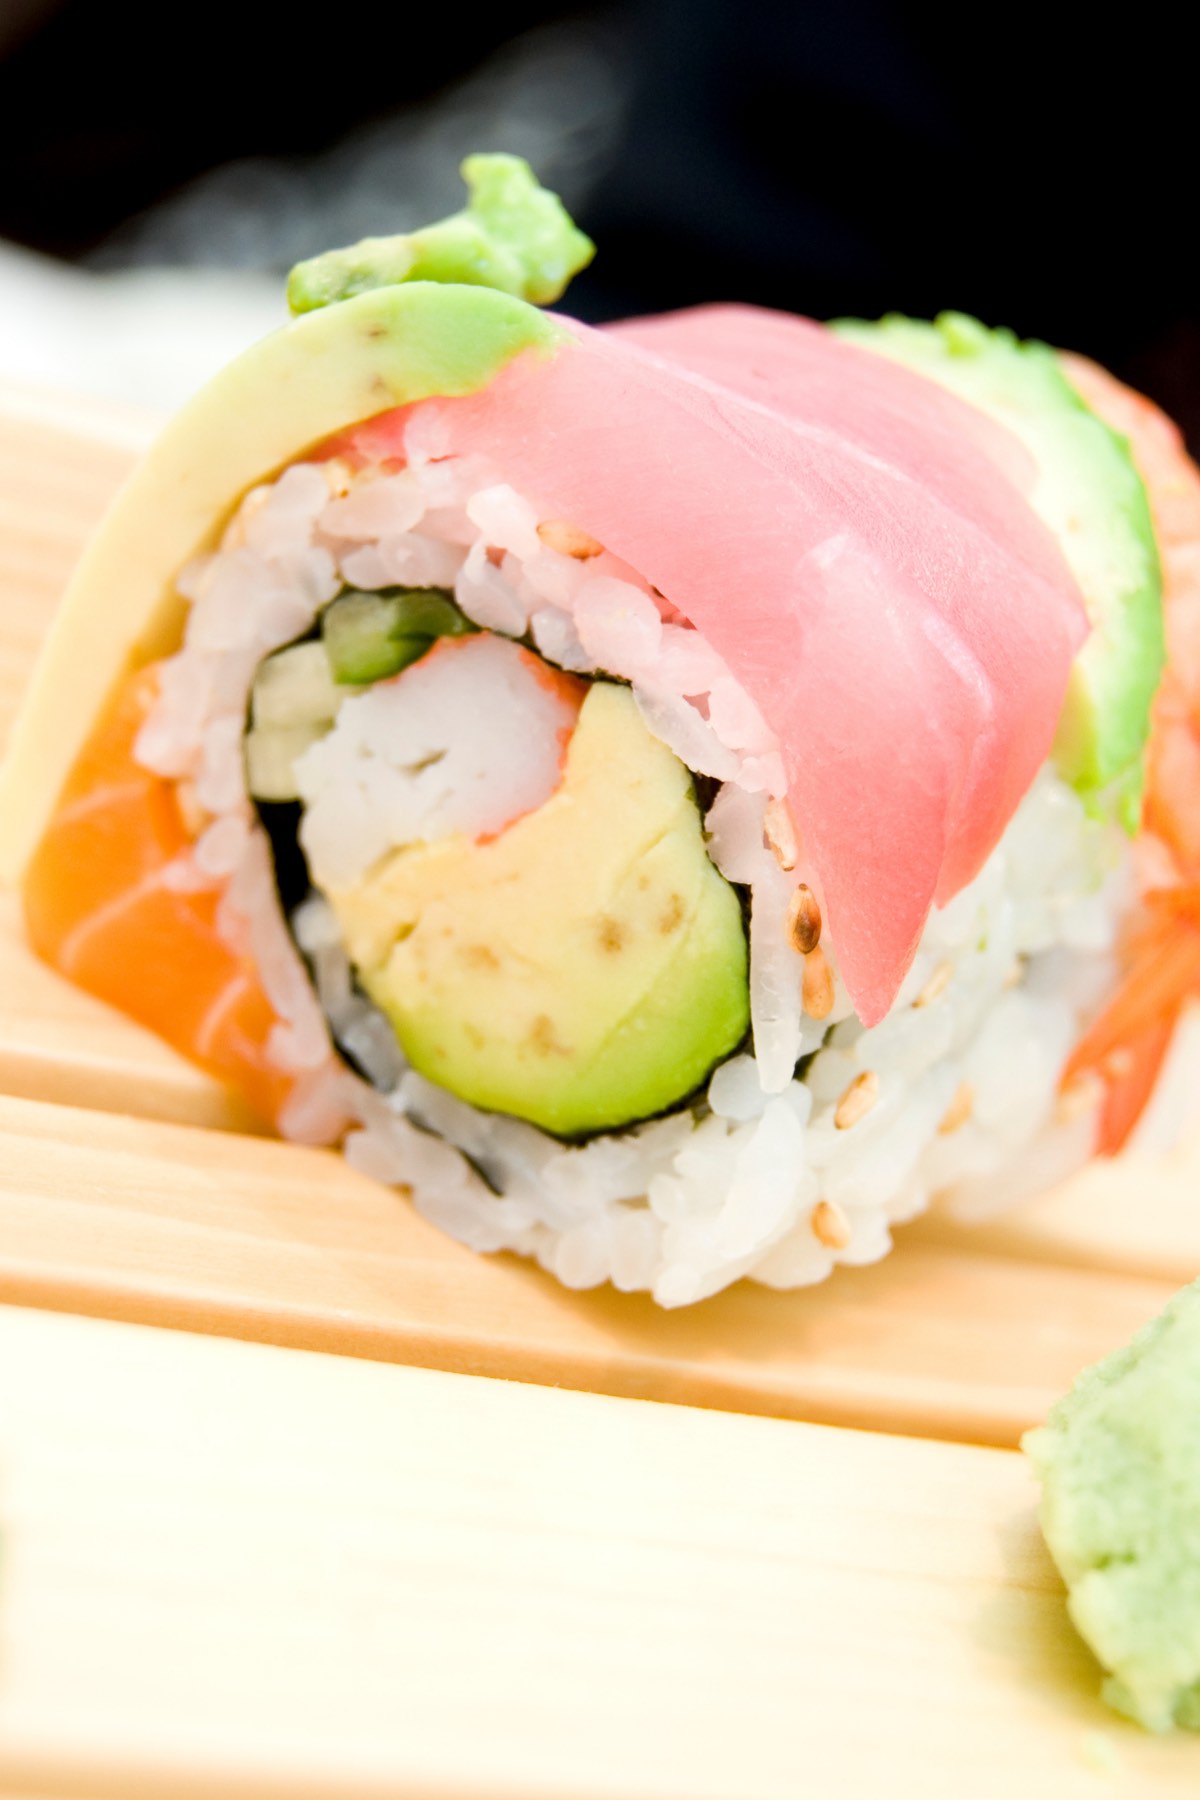  The Rainbow Roll is one of the most popular sushi items at many Japanese restaurants. It’s uramaki sushi with the rice on the outside, covering seaweed nori, and filled with creamy avocado and imitation crab. Atop the rainbow sushi roll is a colorful assortment of fresh fish such as salmon, tuna, yellowtail, together with slices of avocado. This roll is a great way to sample many types of fish at once. 